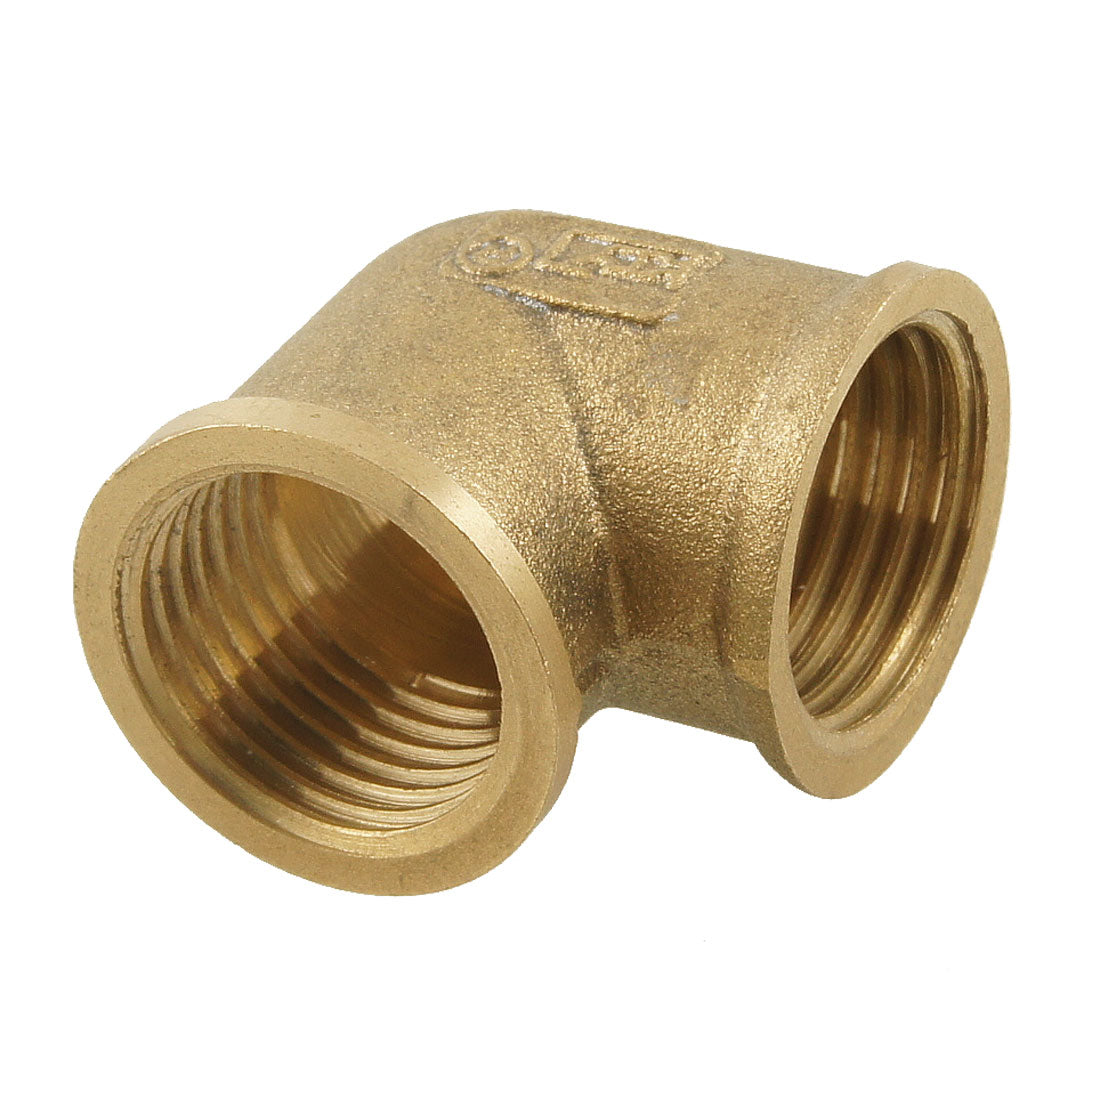 uxcell Uxcell G1/2 Female Threaded 90 Degree Elbow Fitting Union Adapter Brass Tone